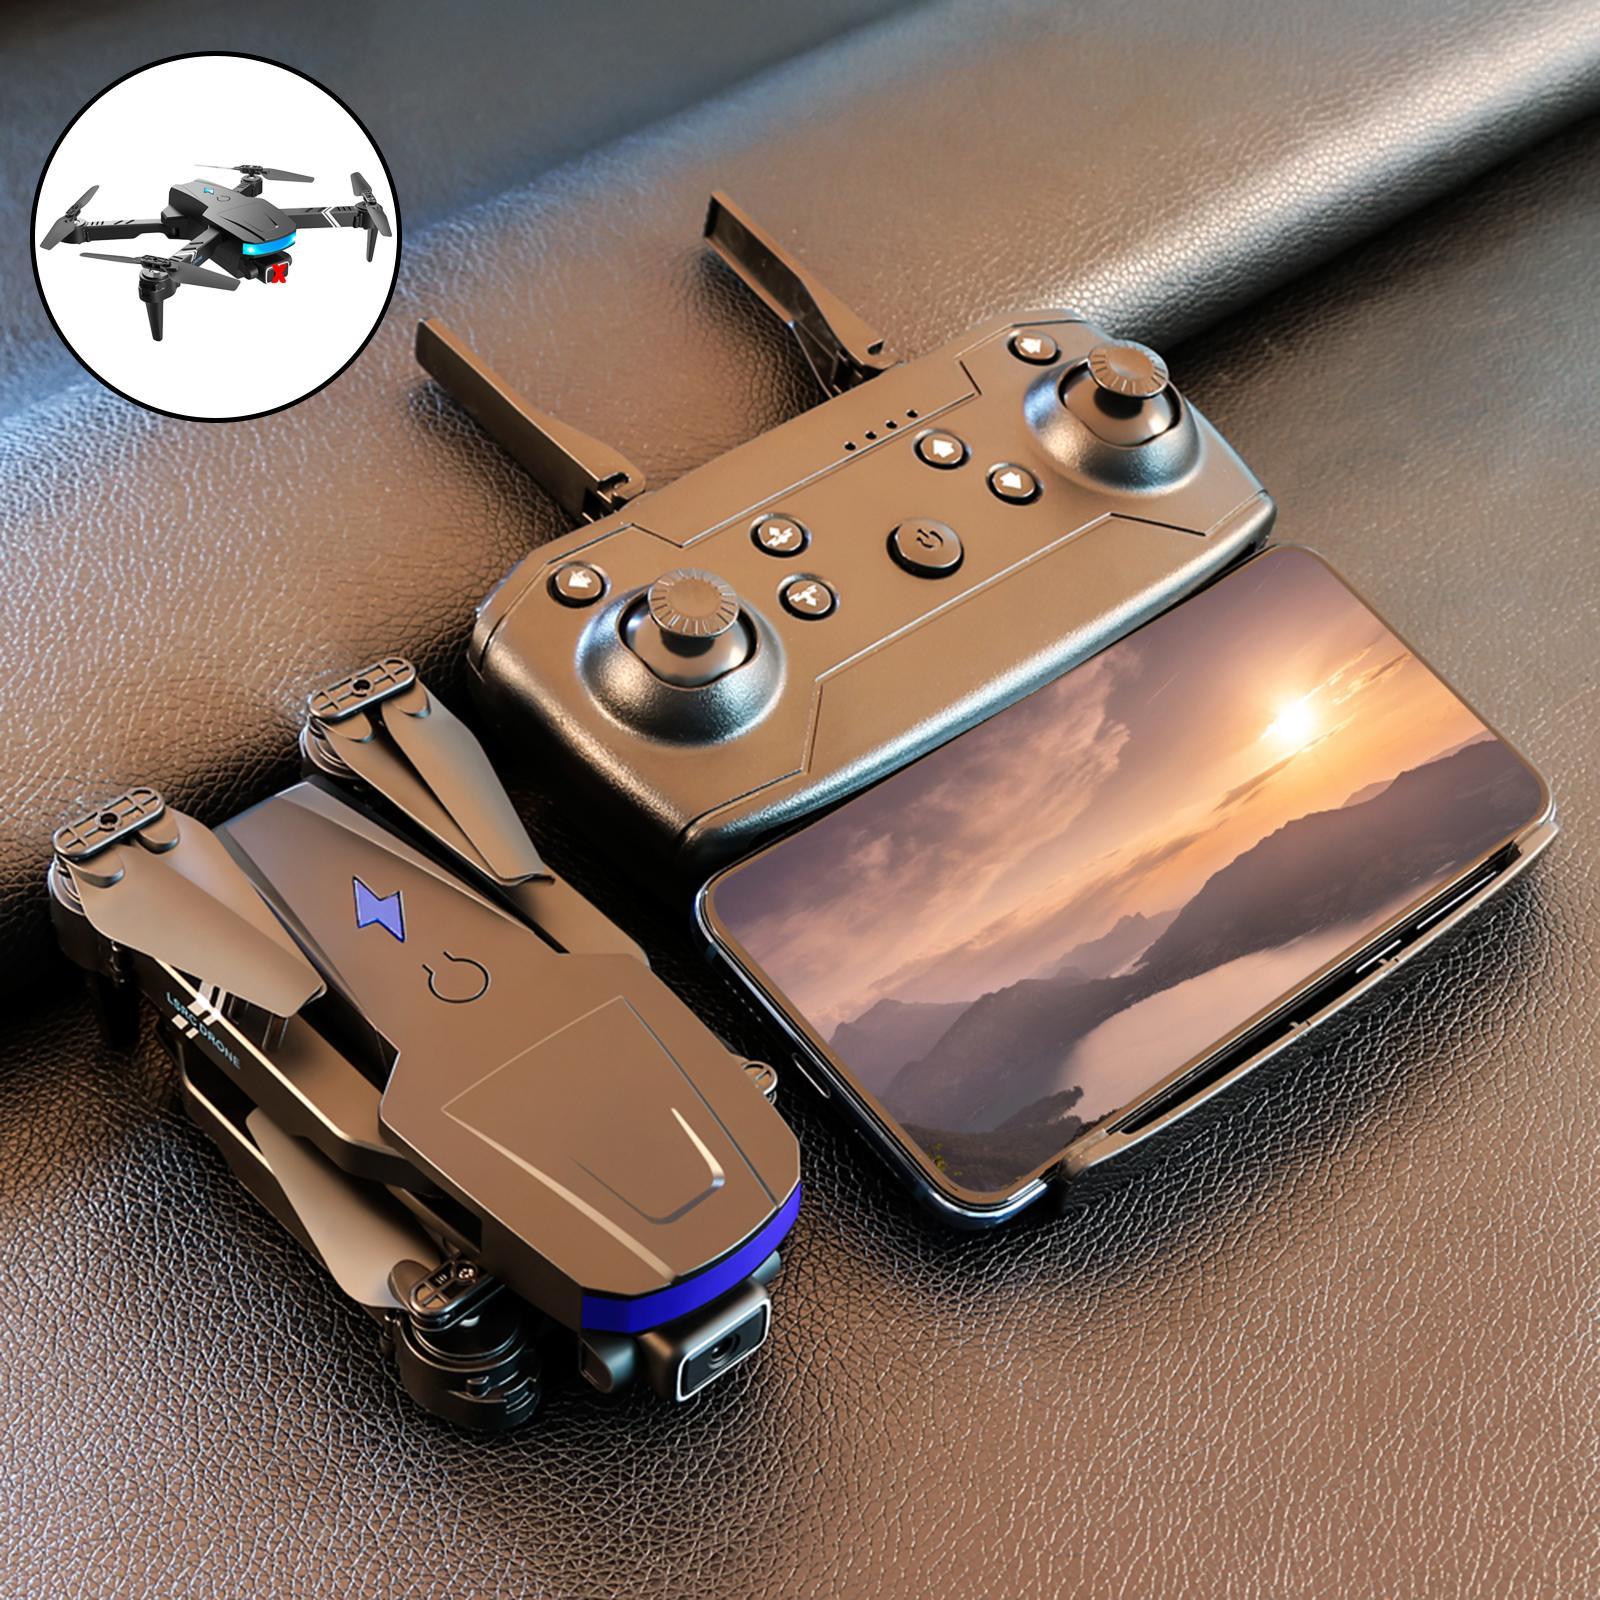 Foldable  Drone 4-Axis Gimbal Dual Camera Live Video  1 battery